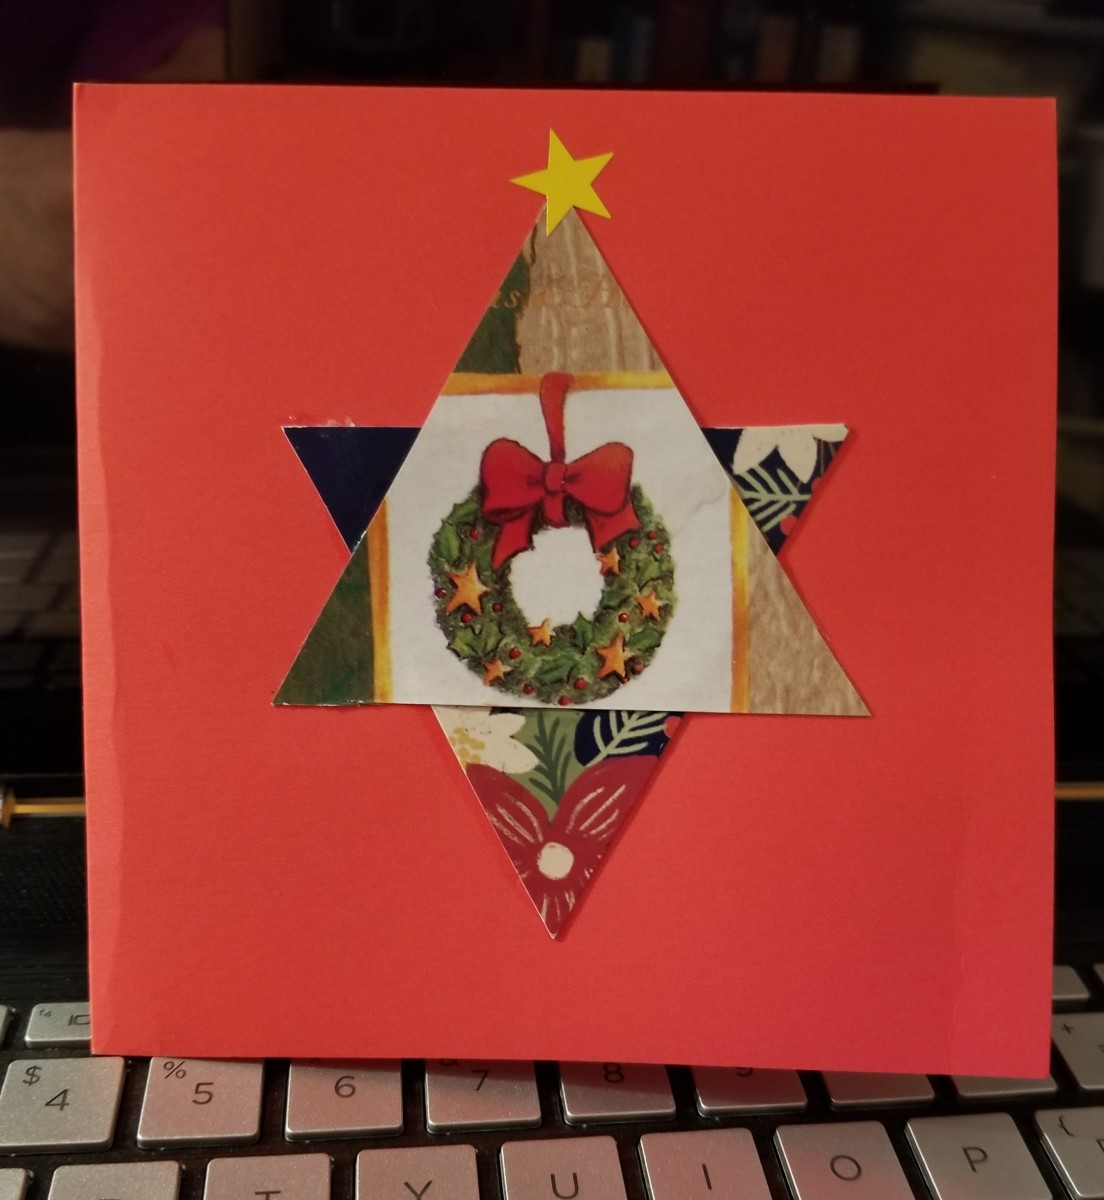 Making your own cards is a good idea. My friend made this simple yet attractive holiday card. She cut two triangles from an old Christmas card and glued them to form a star. Then she added a star sticker at the top. I love it!